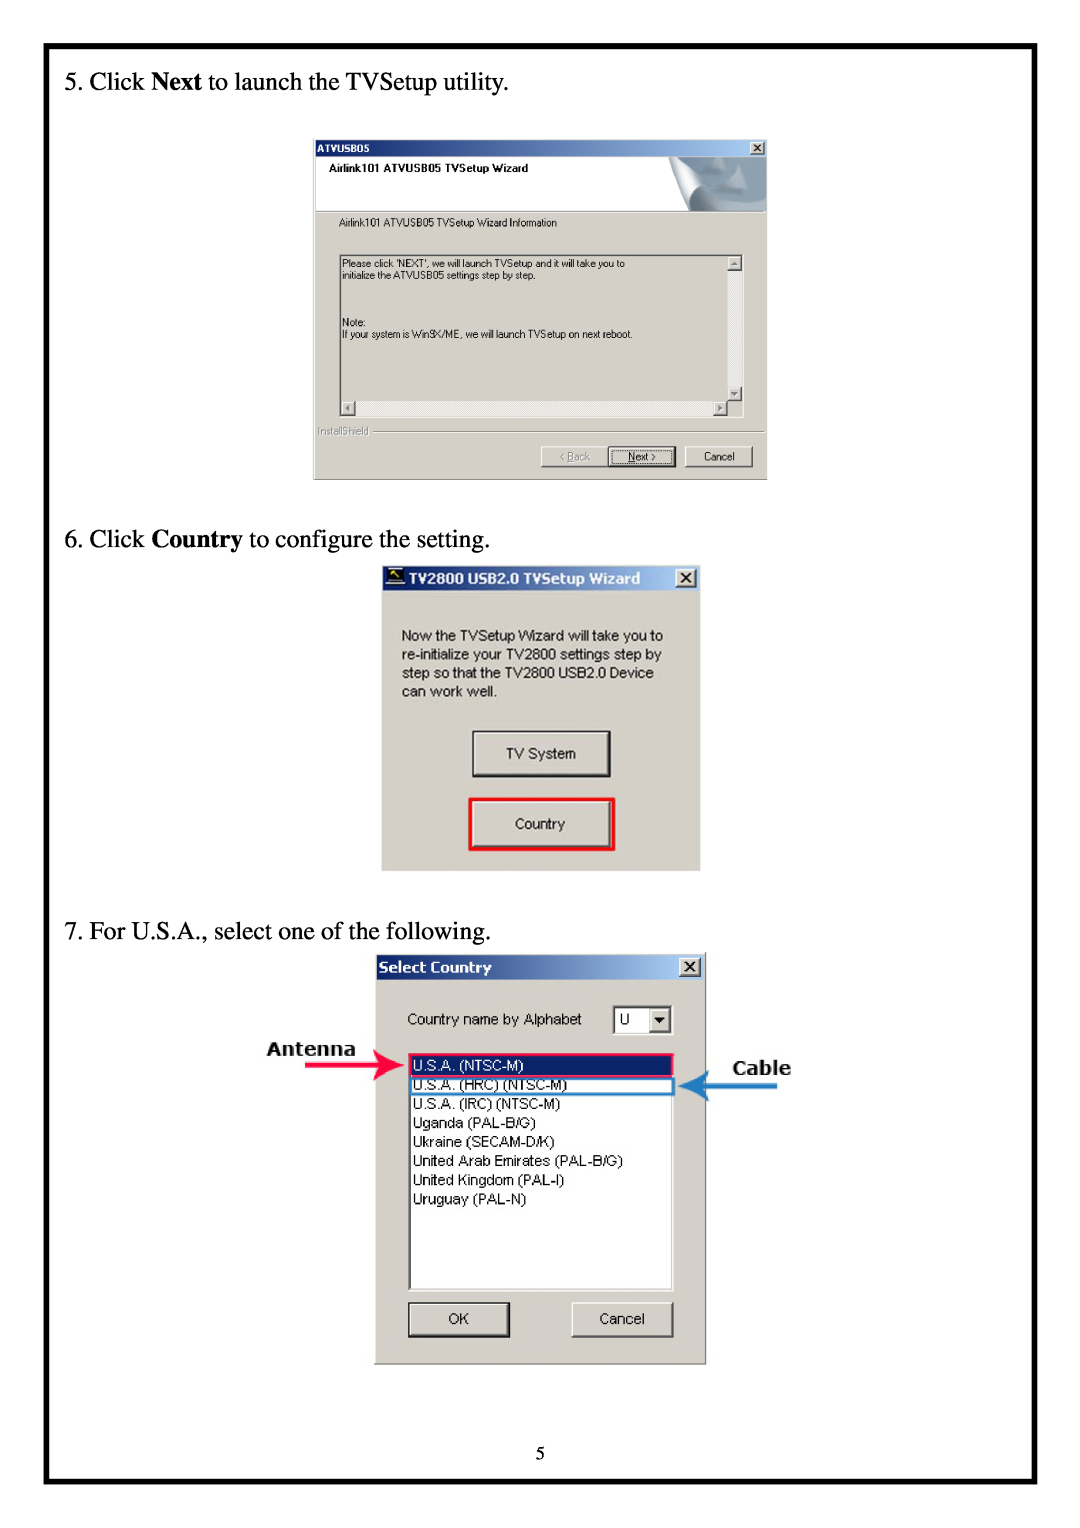 Airlink101 ATVUSB05 manual Click Next to launch the TVSetup utility, Click Country to configure the setting 